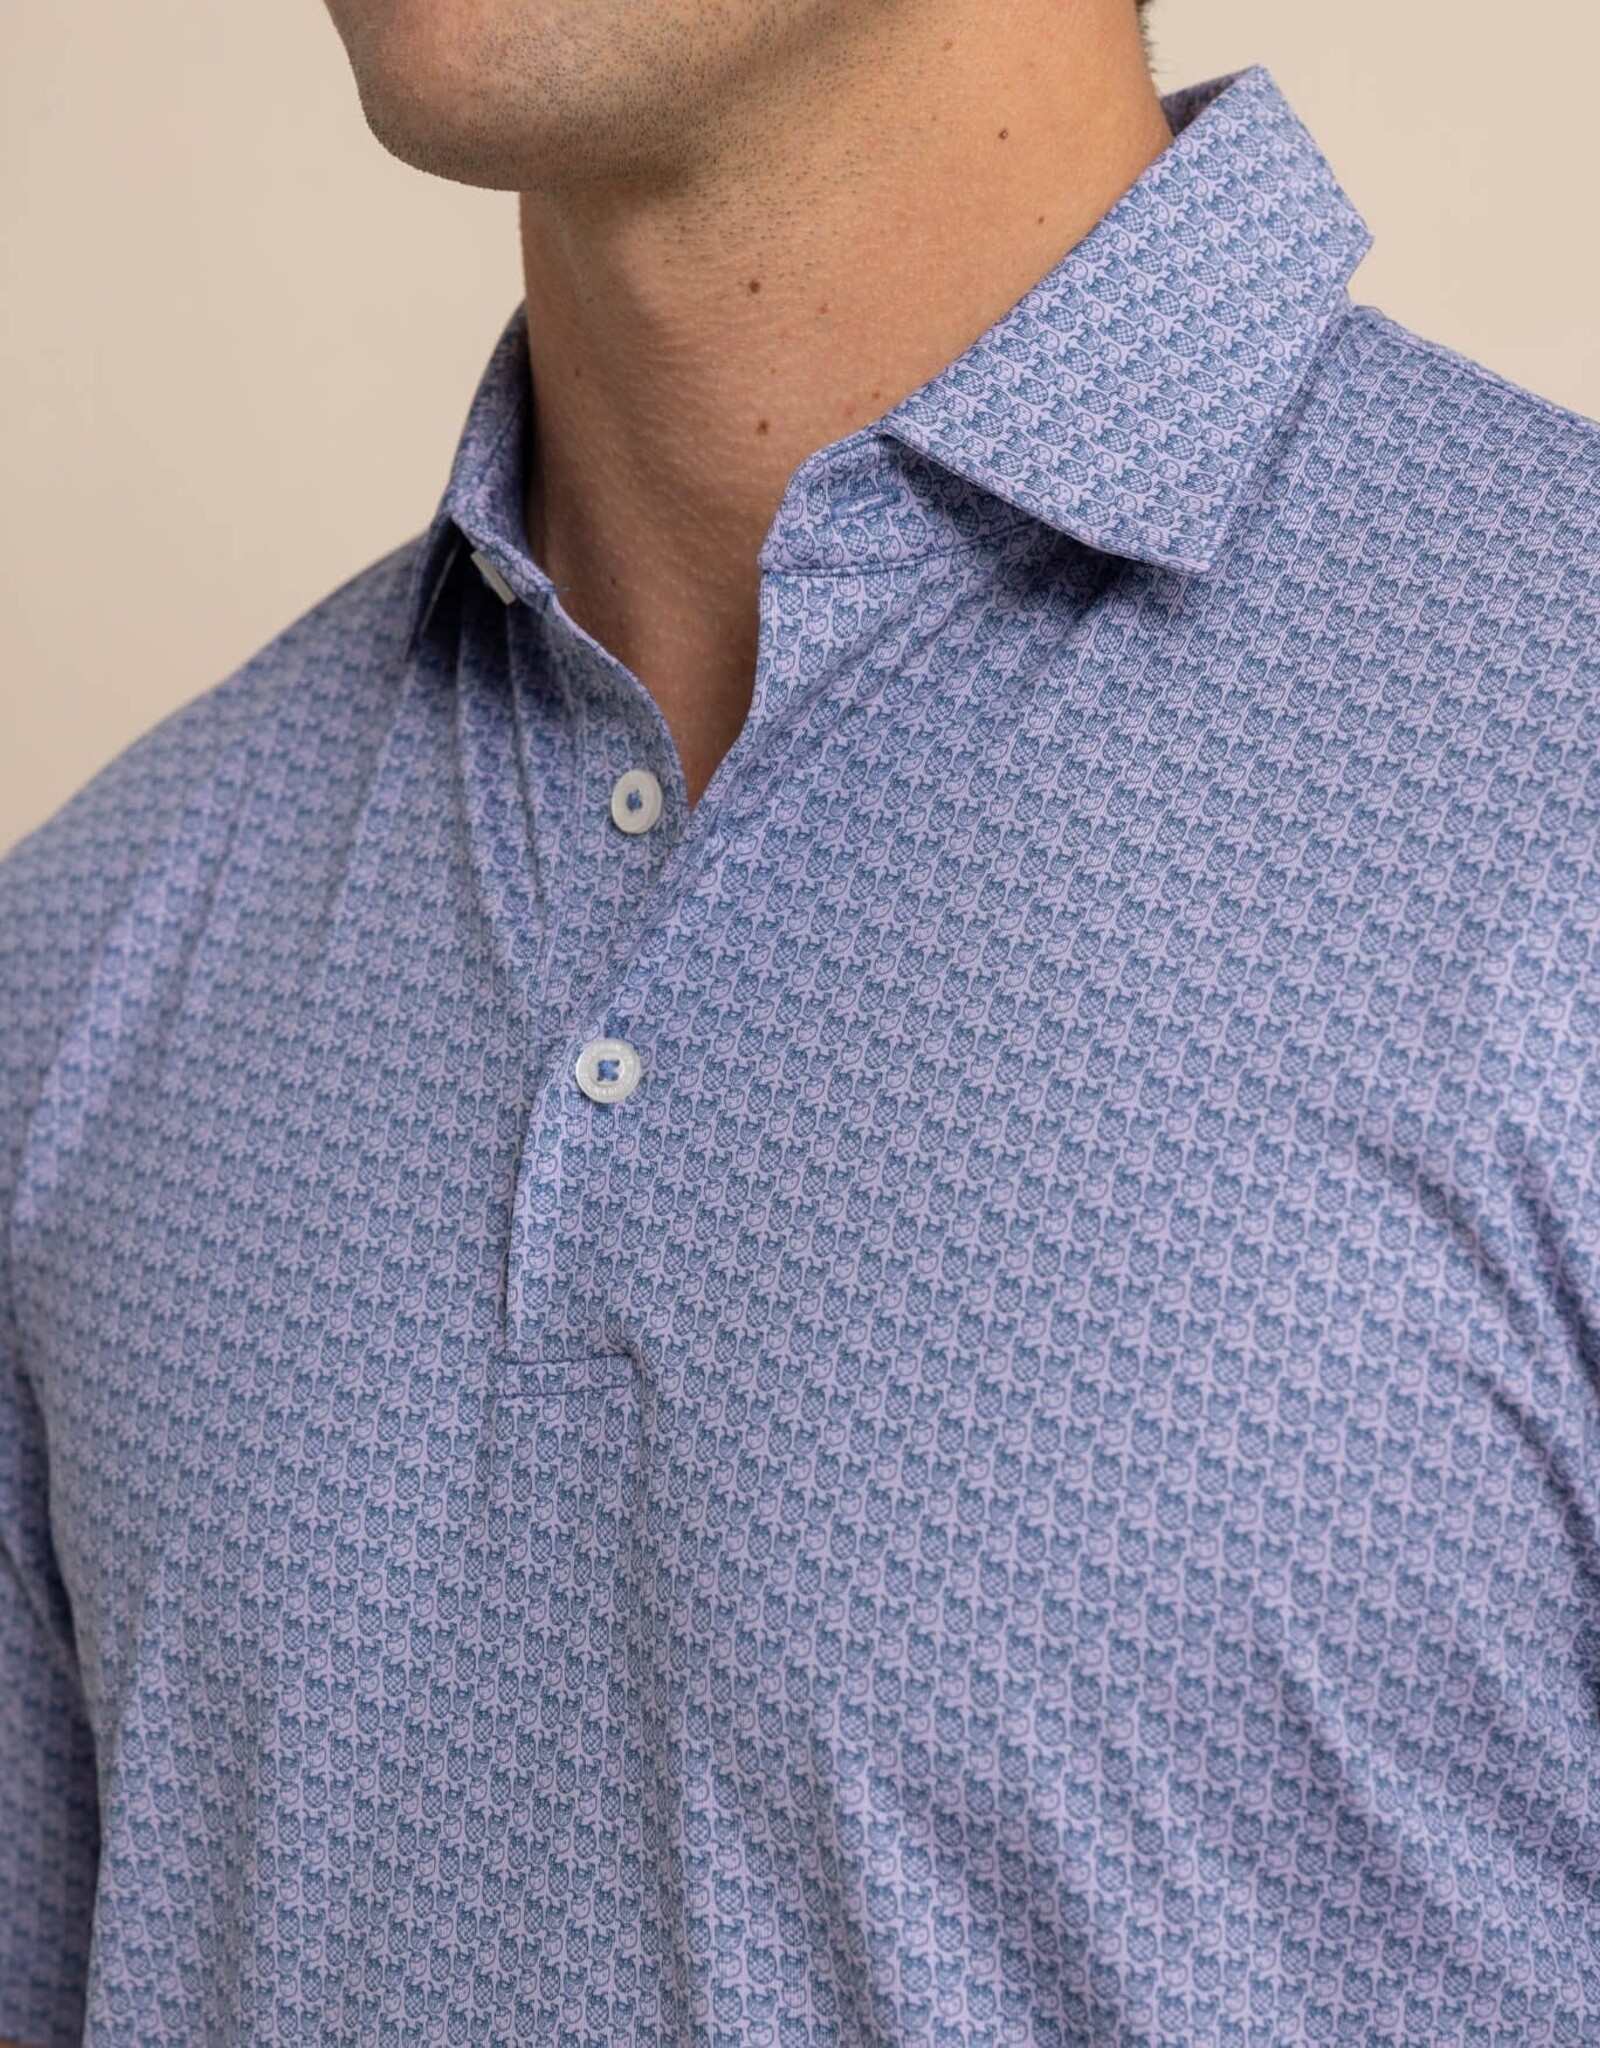 Southern Tide Driver Vacation Views Polo